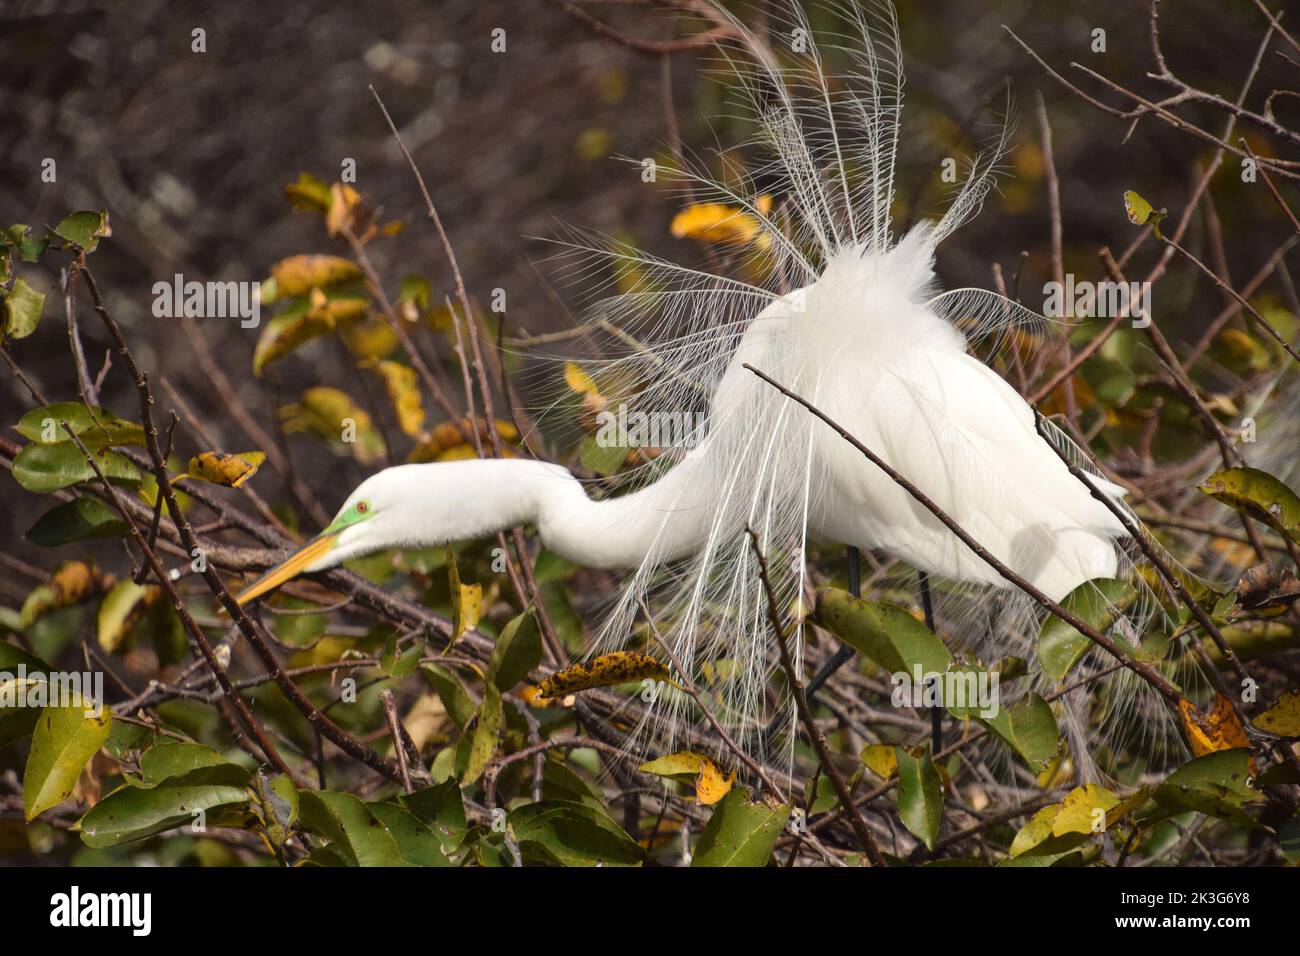 Great egret nesting in the Florida Everglades Stock Photo